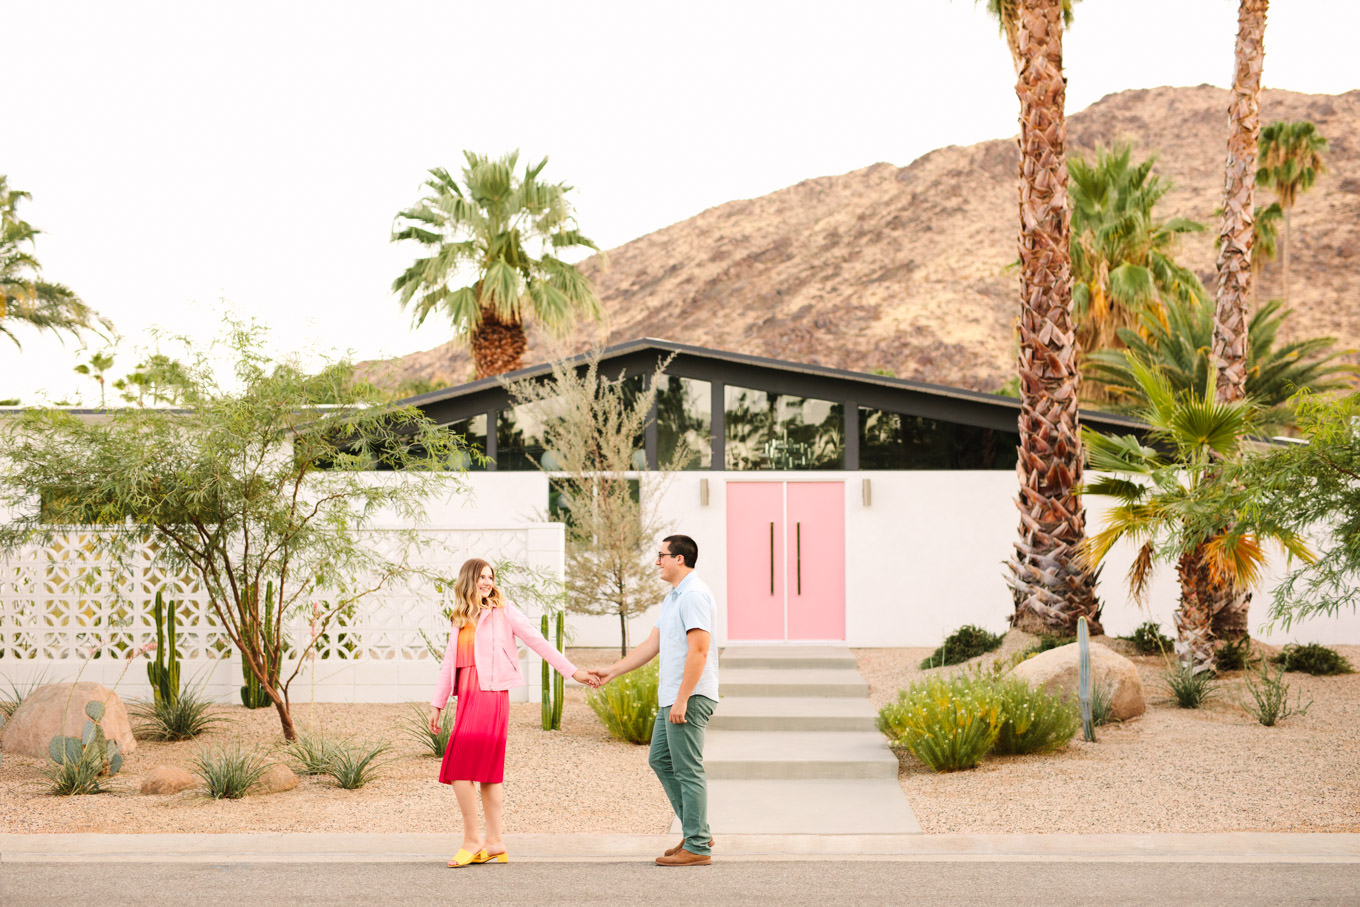 Pink door Palm Springs engagement session | Engagement, elopement, and wedding photography roundup of Mary Costa’s favorite images from 2020 | Colorful and elevated photography for fun-loving couples in Southern California | #2020wedding #elopement #weddingphoto #weddingphotography #microwedding   Source: Mary Costa Photography | Los Angeles